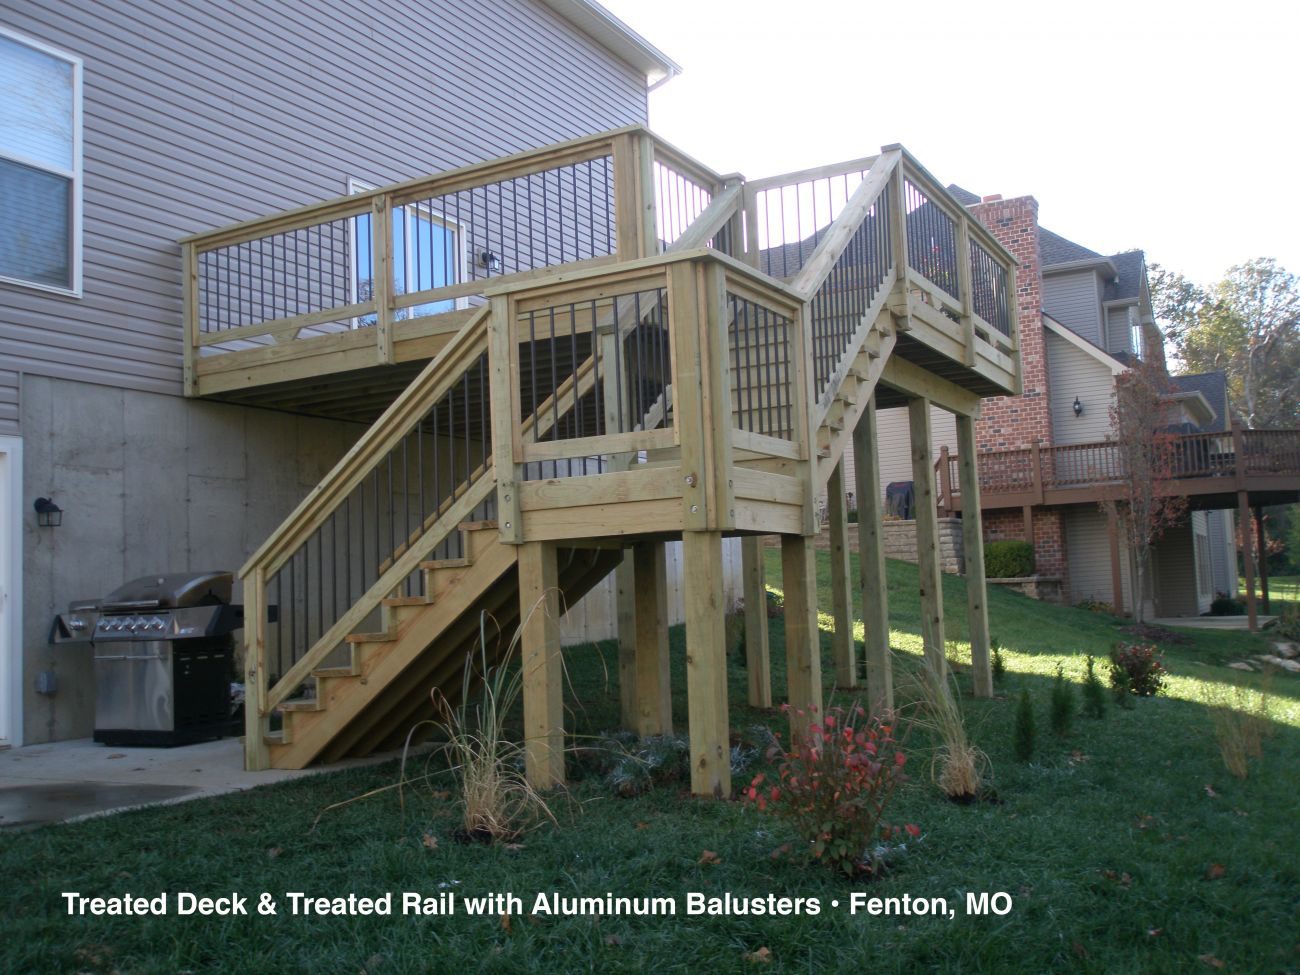 Treated Deck with Treated Rail and Aluminum Balusters